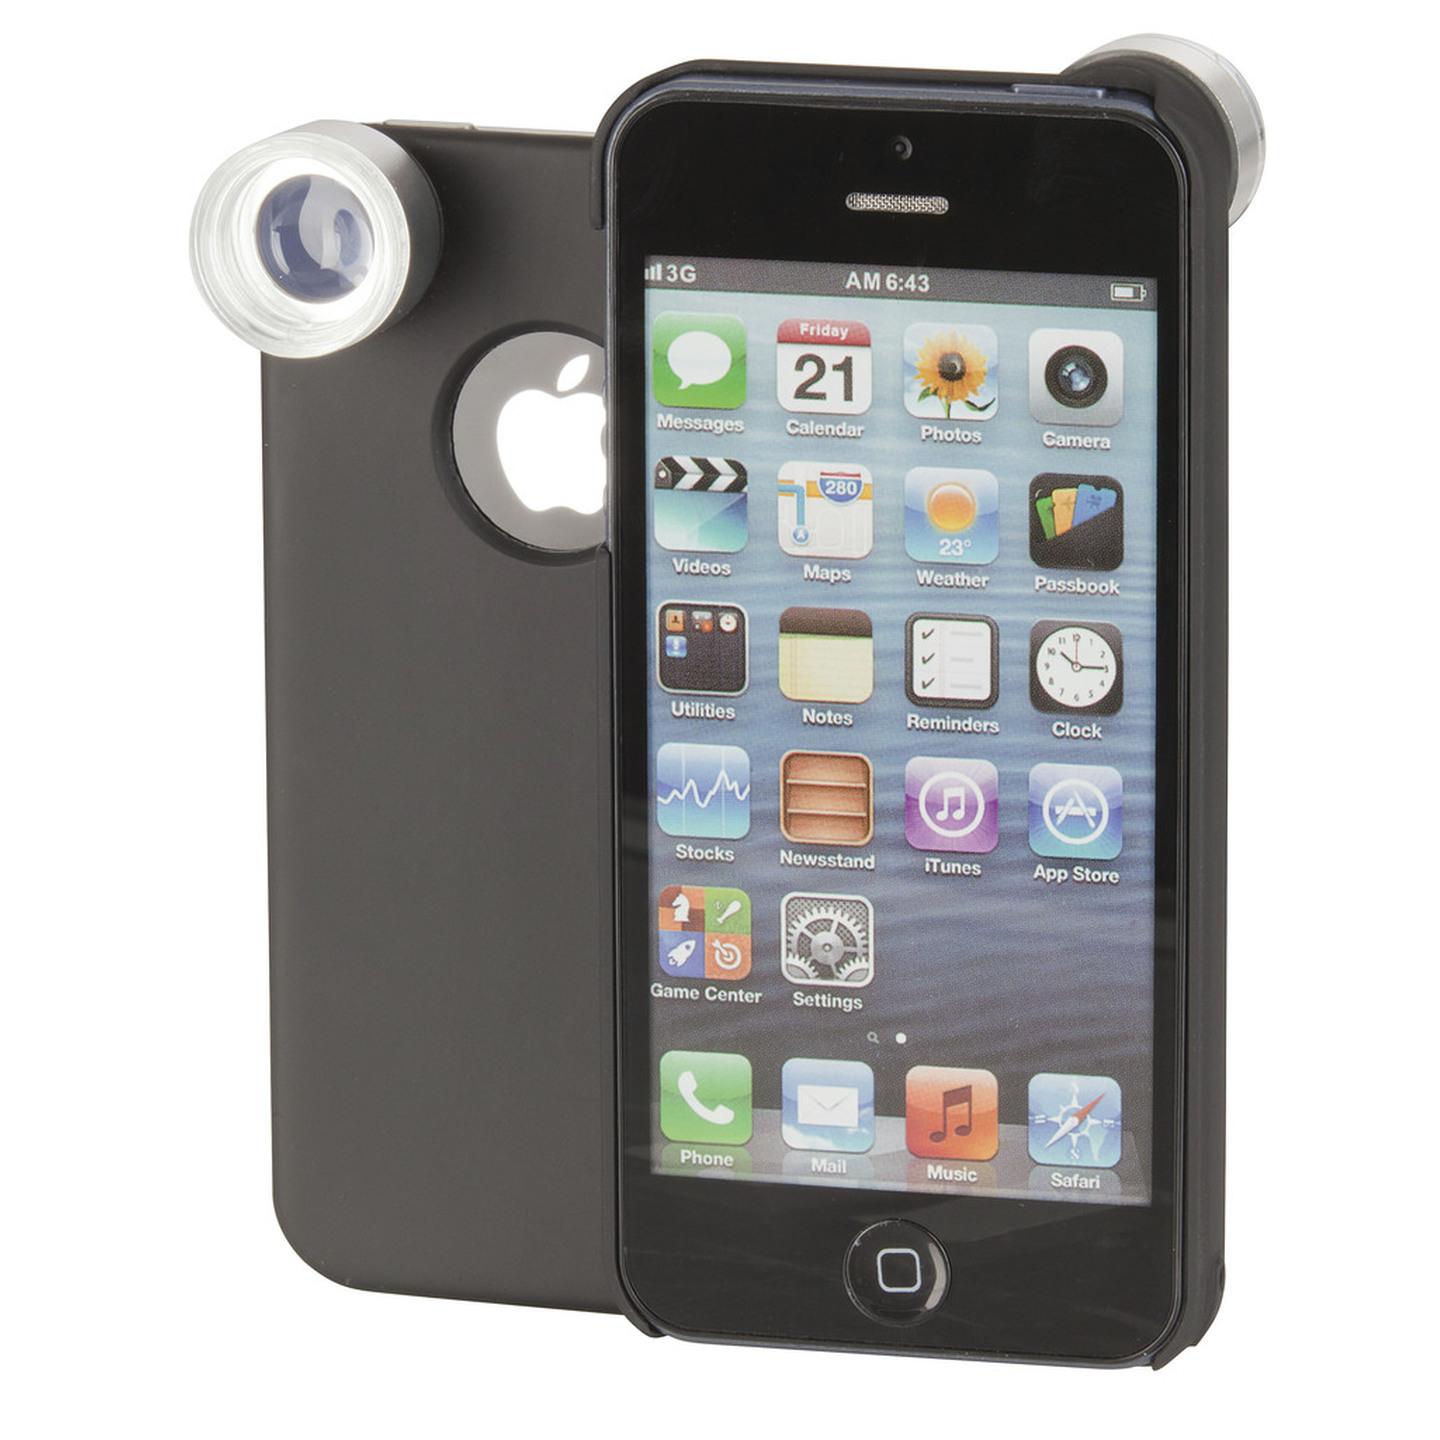 50x Magnifier with cover to suit iPhone 4/5/Samsung Galaxy S3